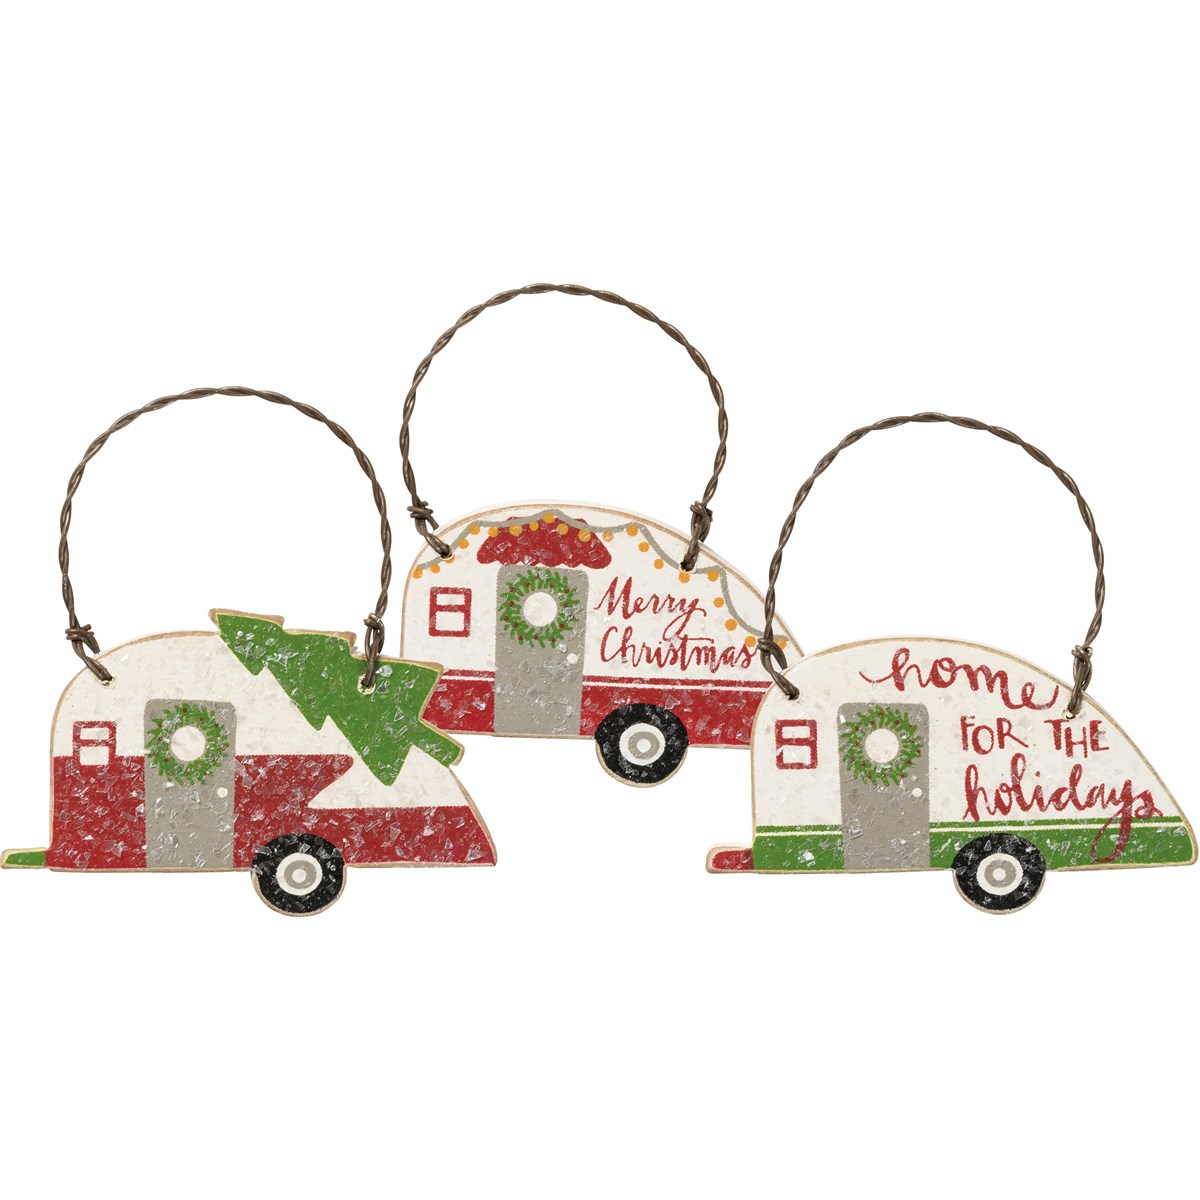 Ornament Set - Merry Christmas, Home For Holidays - 2.50" x 1.50", 2.50" x 1.50" - Wood, Wire, Mica